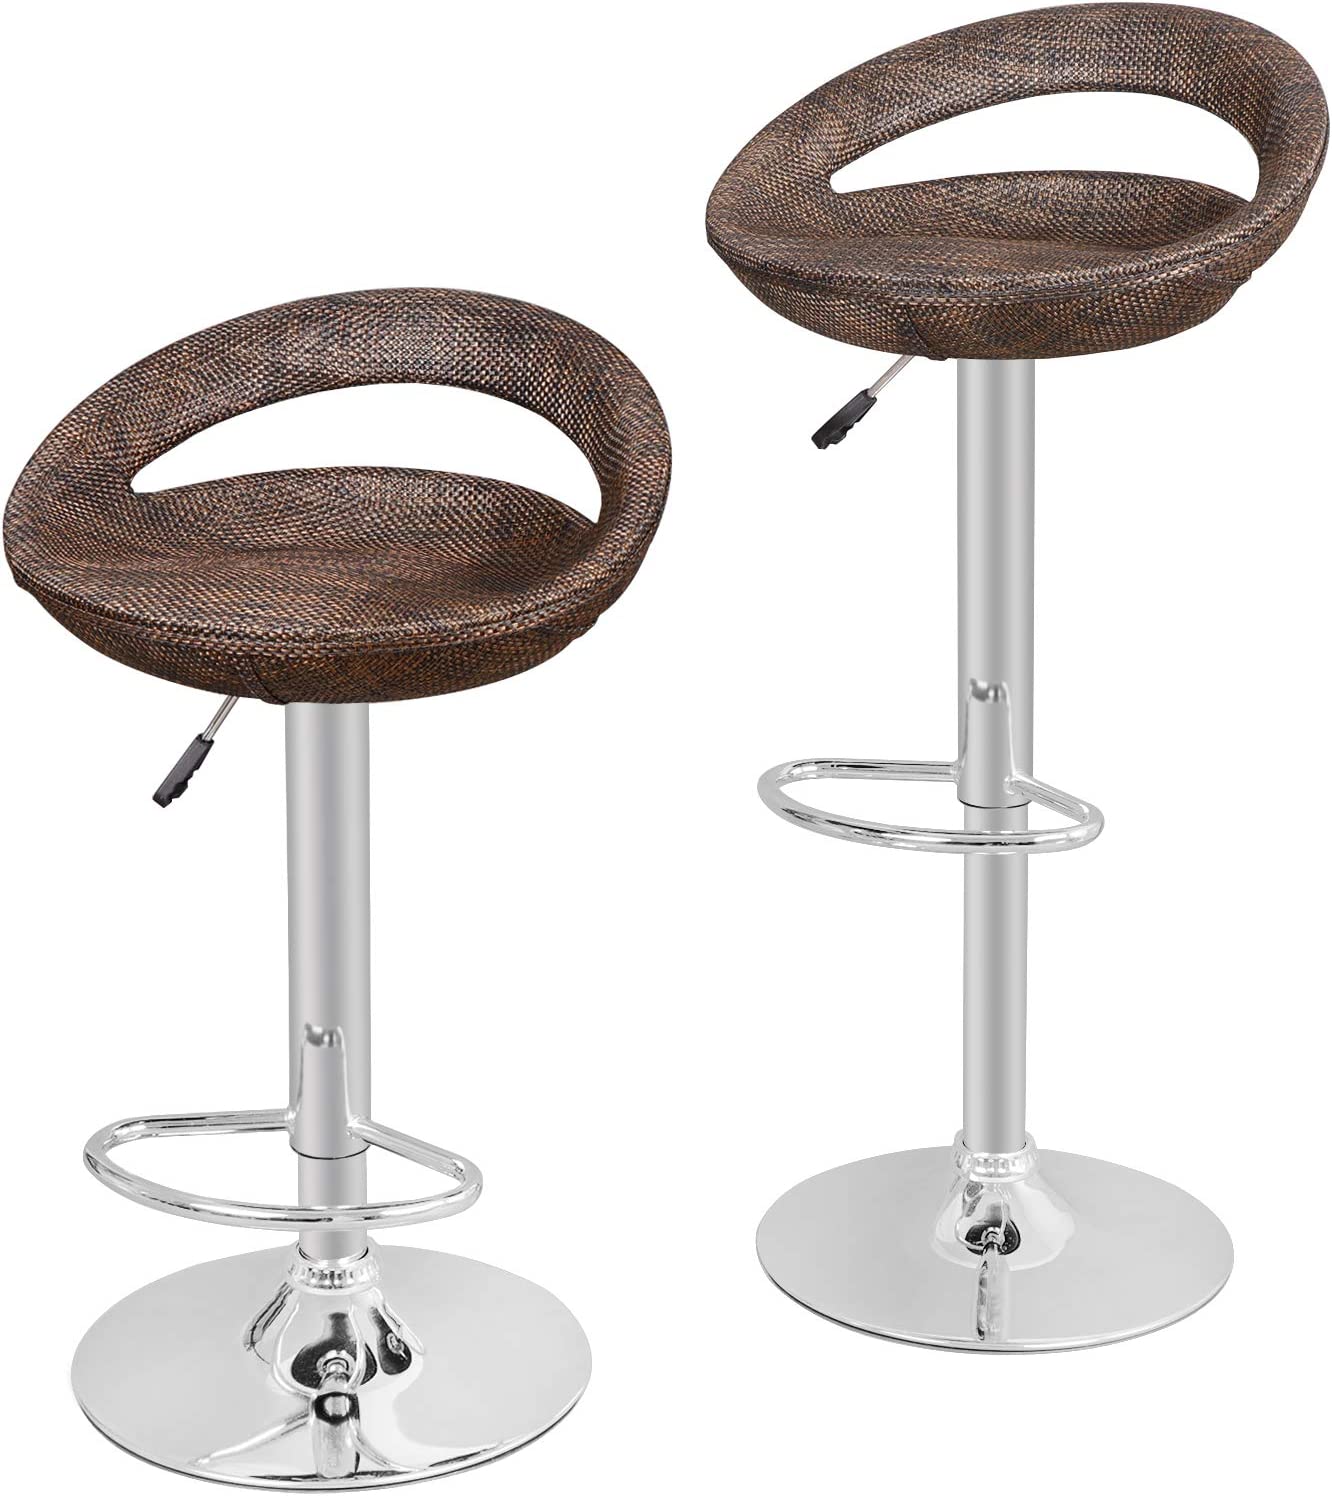 Set of 4 Adjustable Bar Stools, Pub Swivel Barstool Chairs with Back, Pub Kitchen Counter Height Modern Patio Barstool